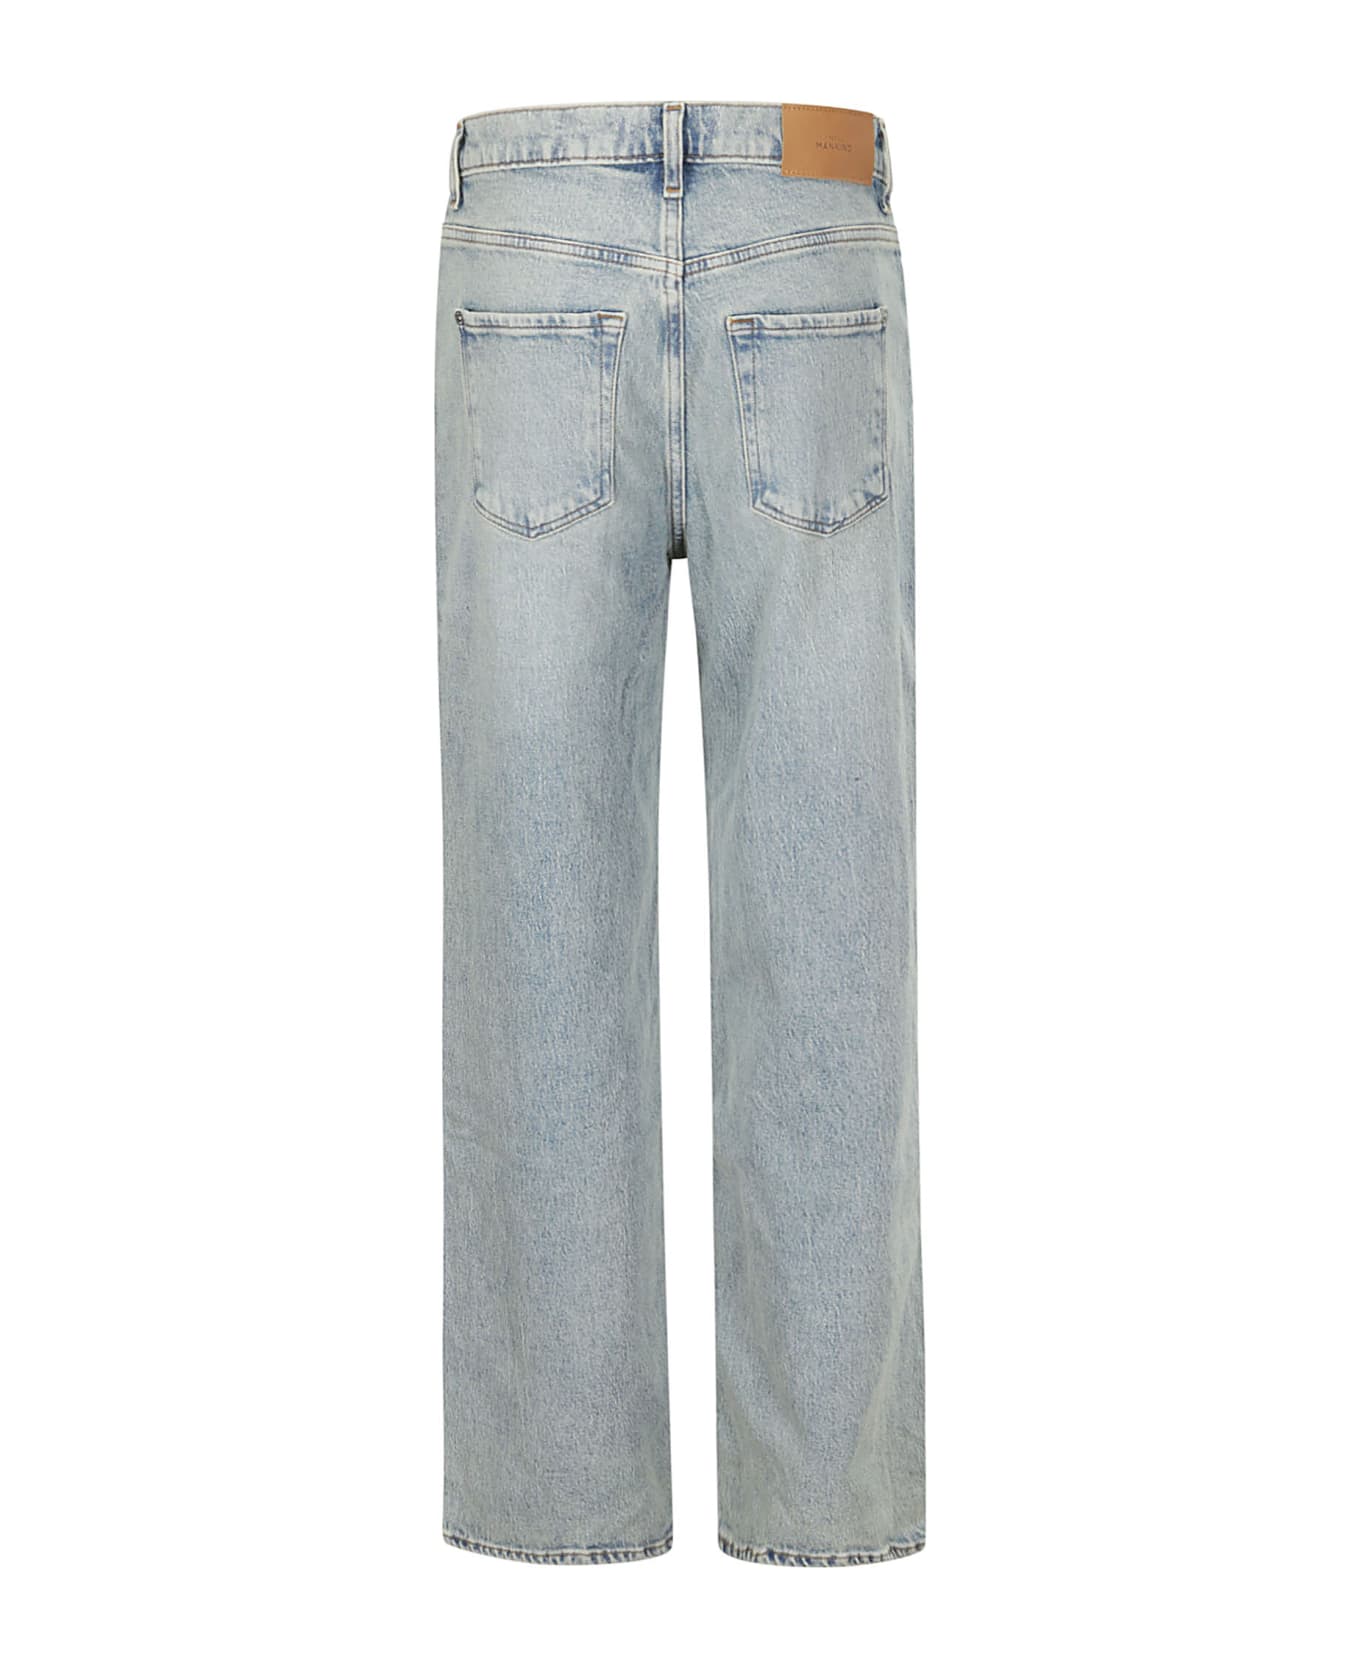 7 For All Mankind Scout Frost - LIGHT BLUE